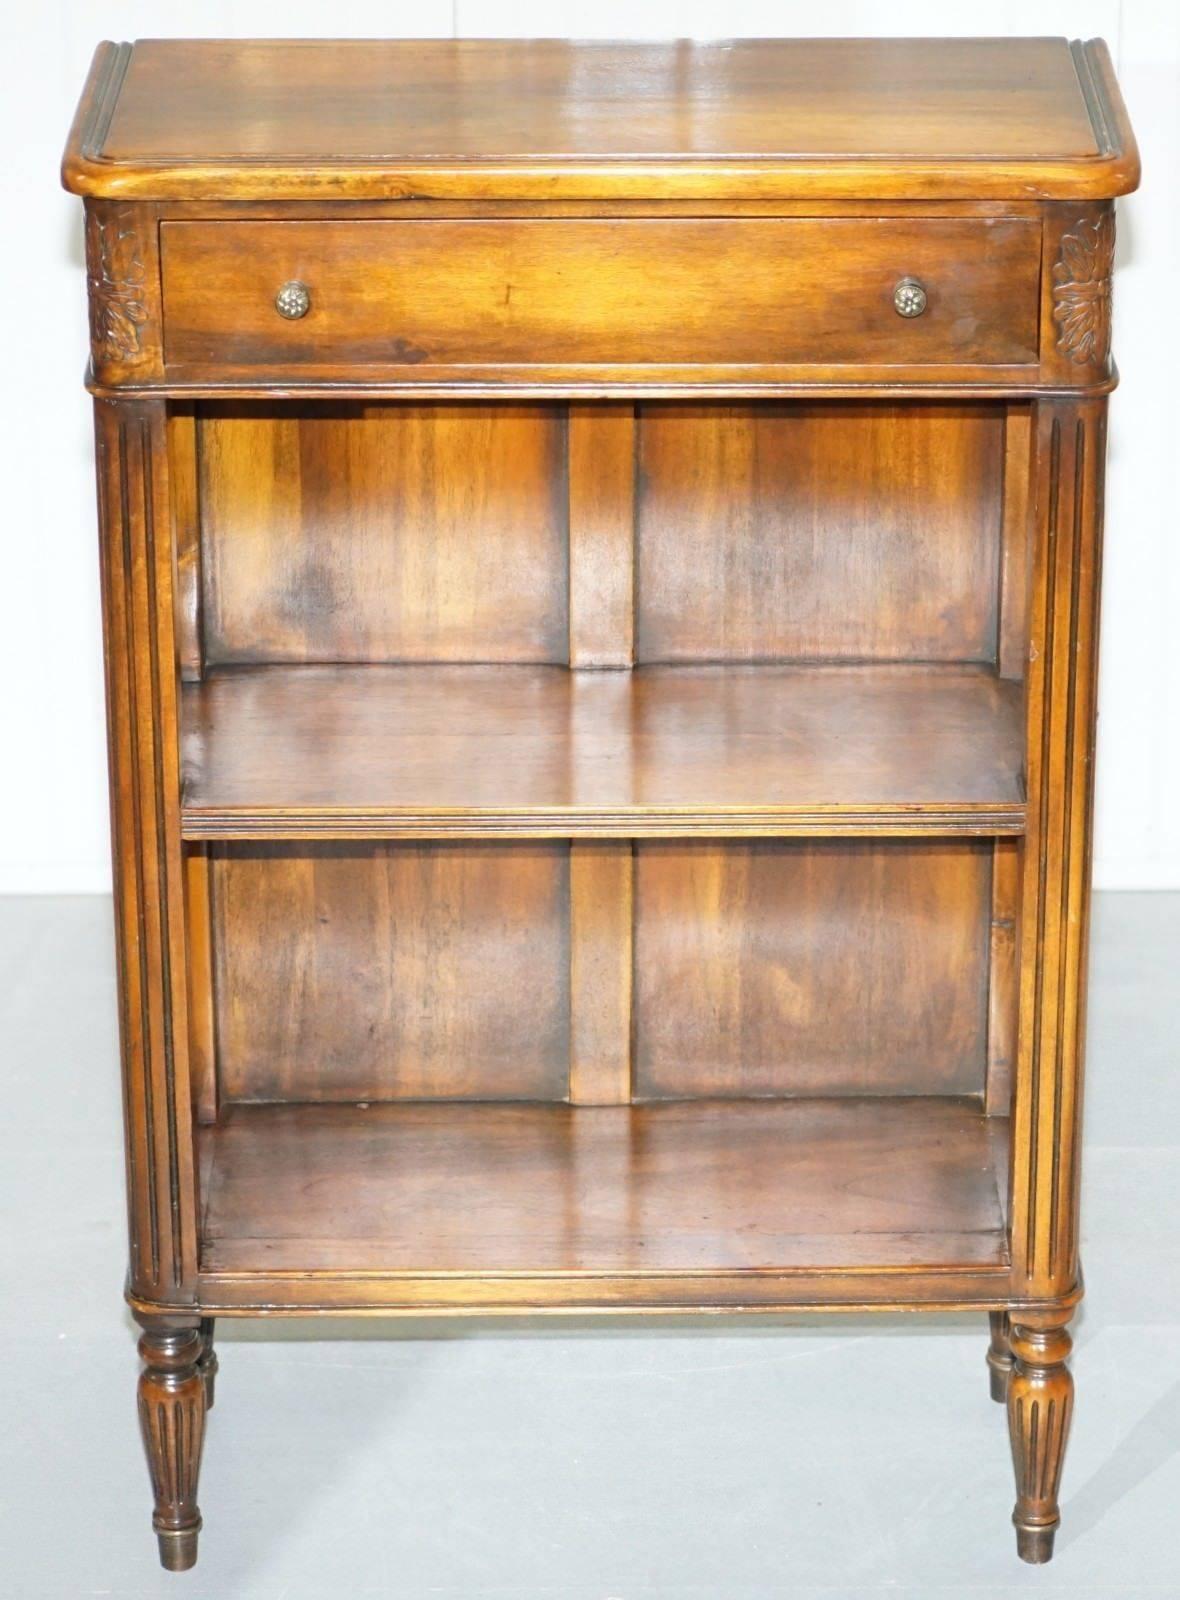 Regency Matching Pair of Theodore Alexander Republic Low Bookcases with Single Drawer